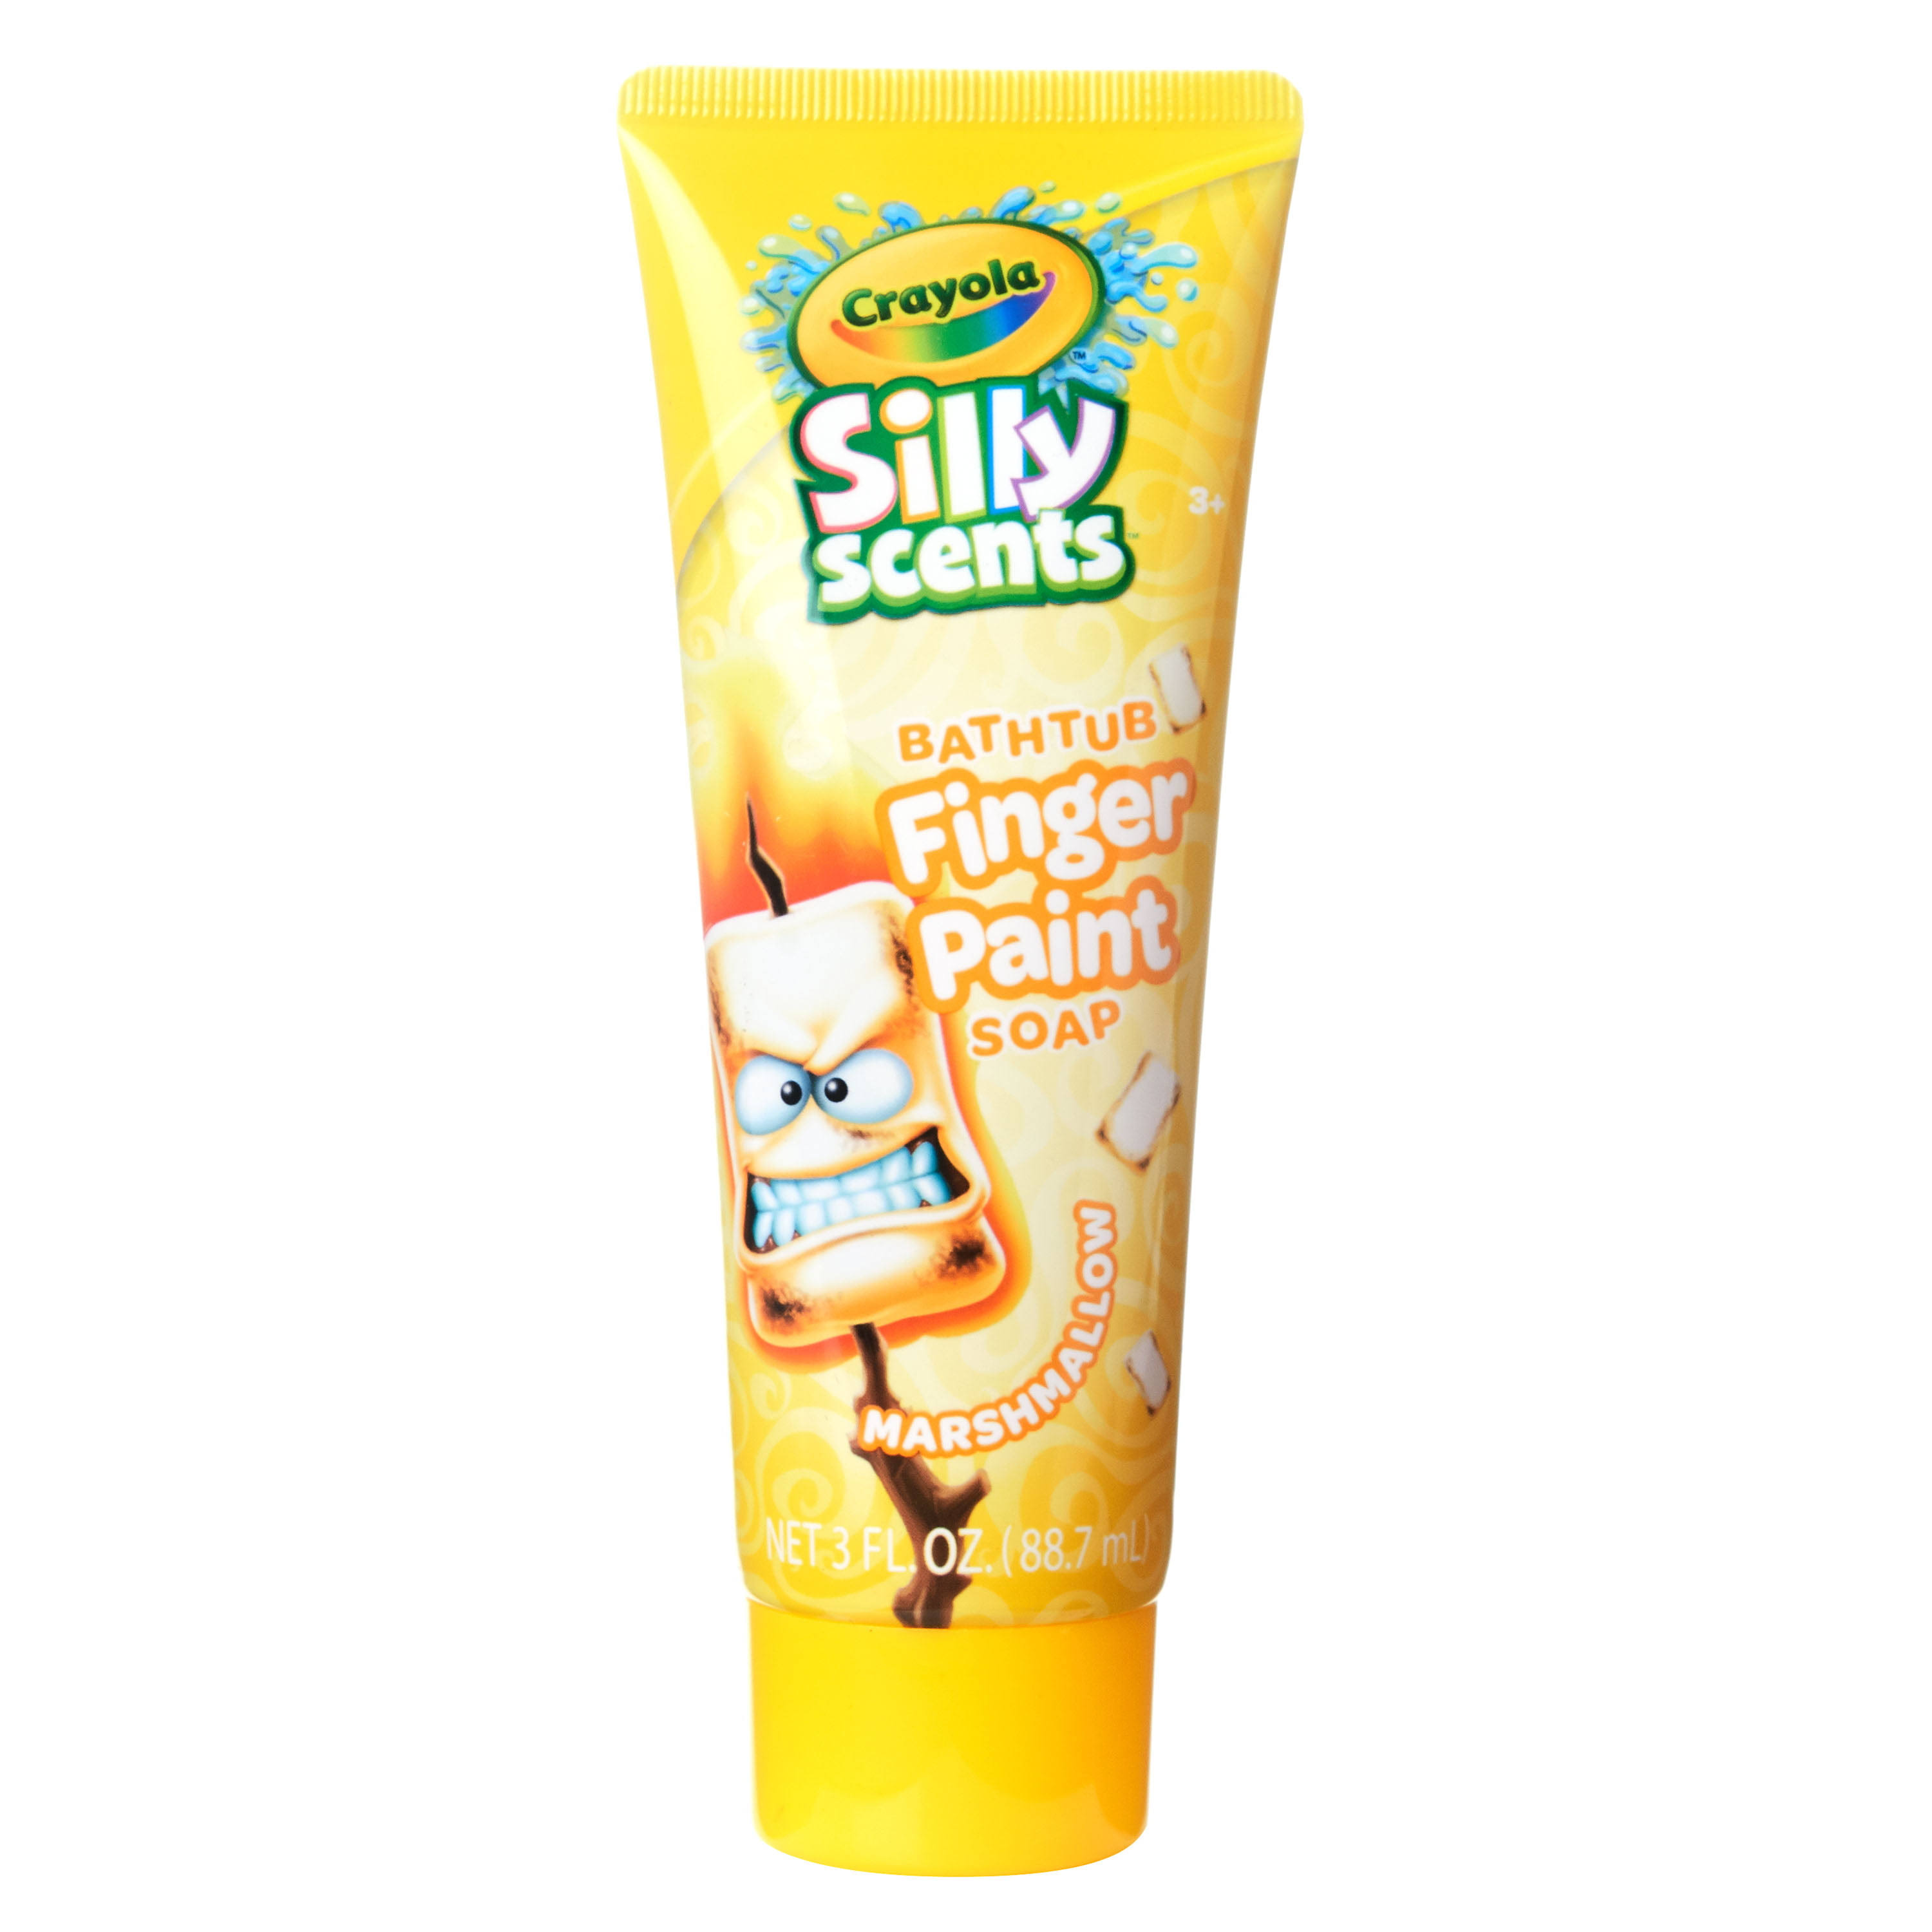 Silly Scents Bathtub Finger Paint Soap (marshmallow)